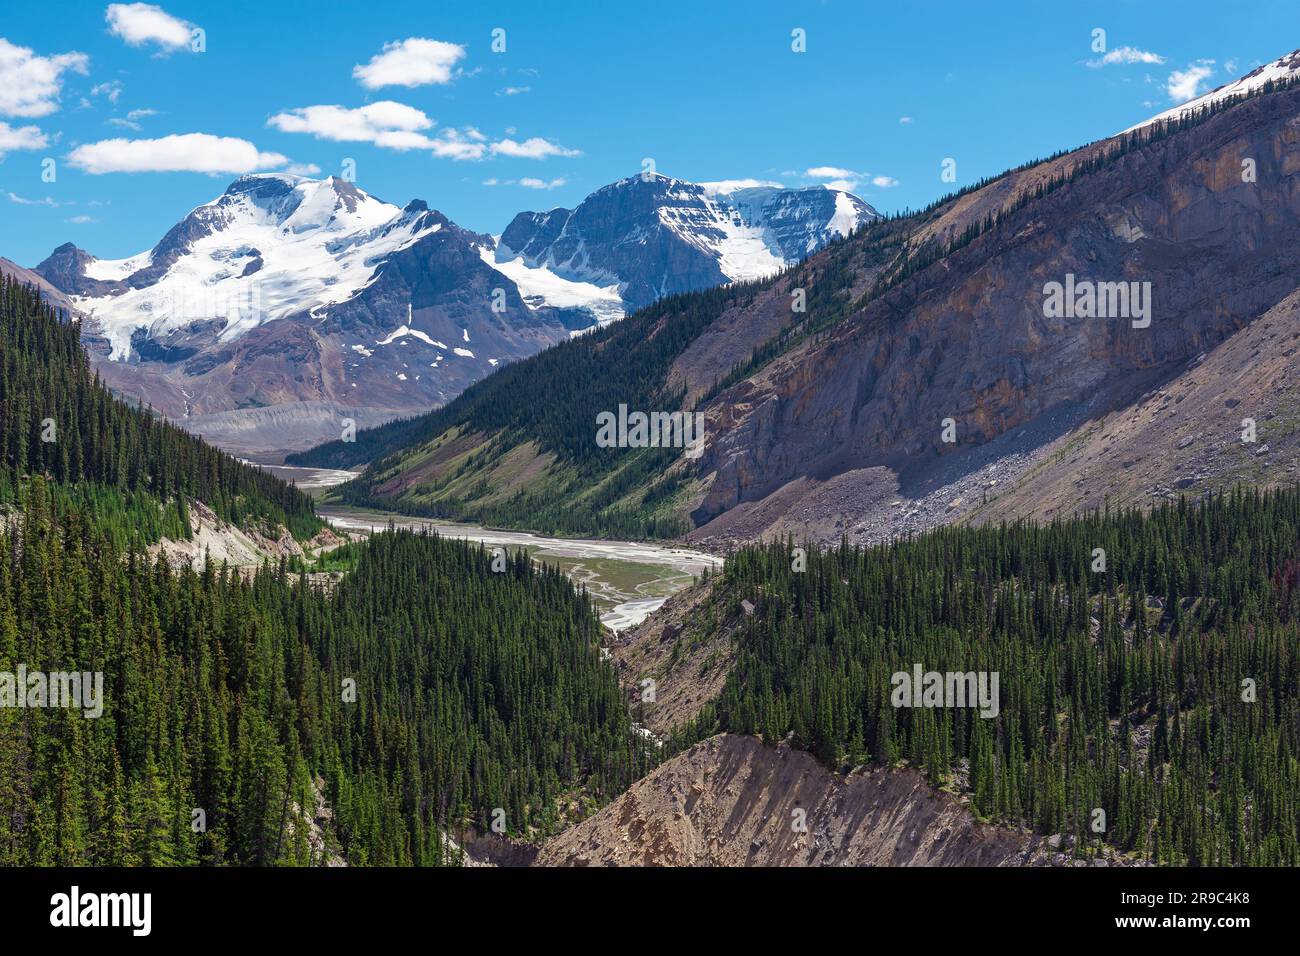 Columbia Icefield Skywalk landscape over pine tree forest, Athabasca river and Rocky Mountains, Banff national park, Canada. Stock Photo